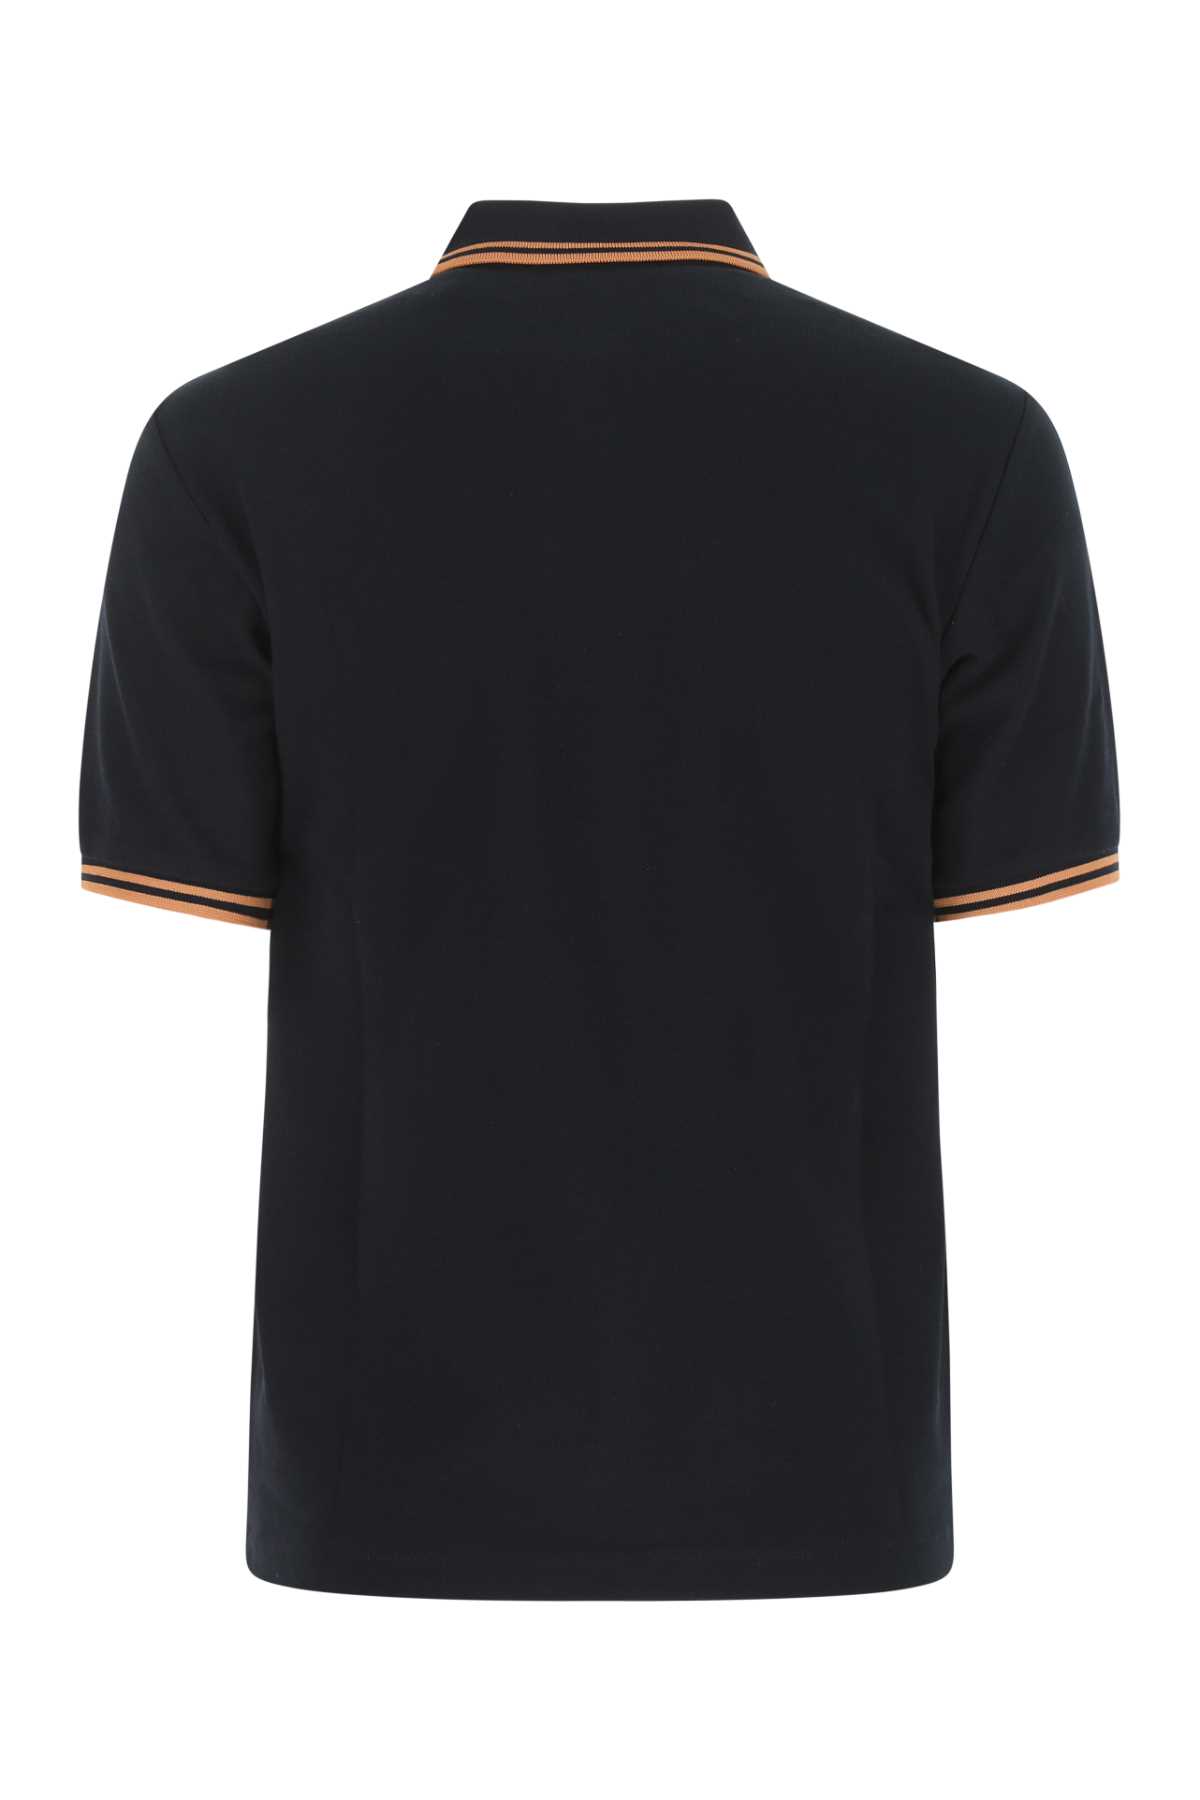 Fred Perry Navy Blue Piquet Polo Shirt In 721